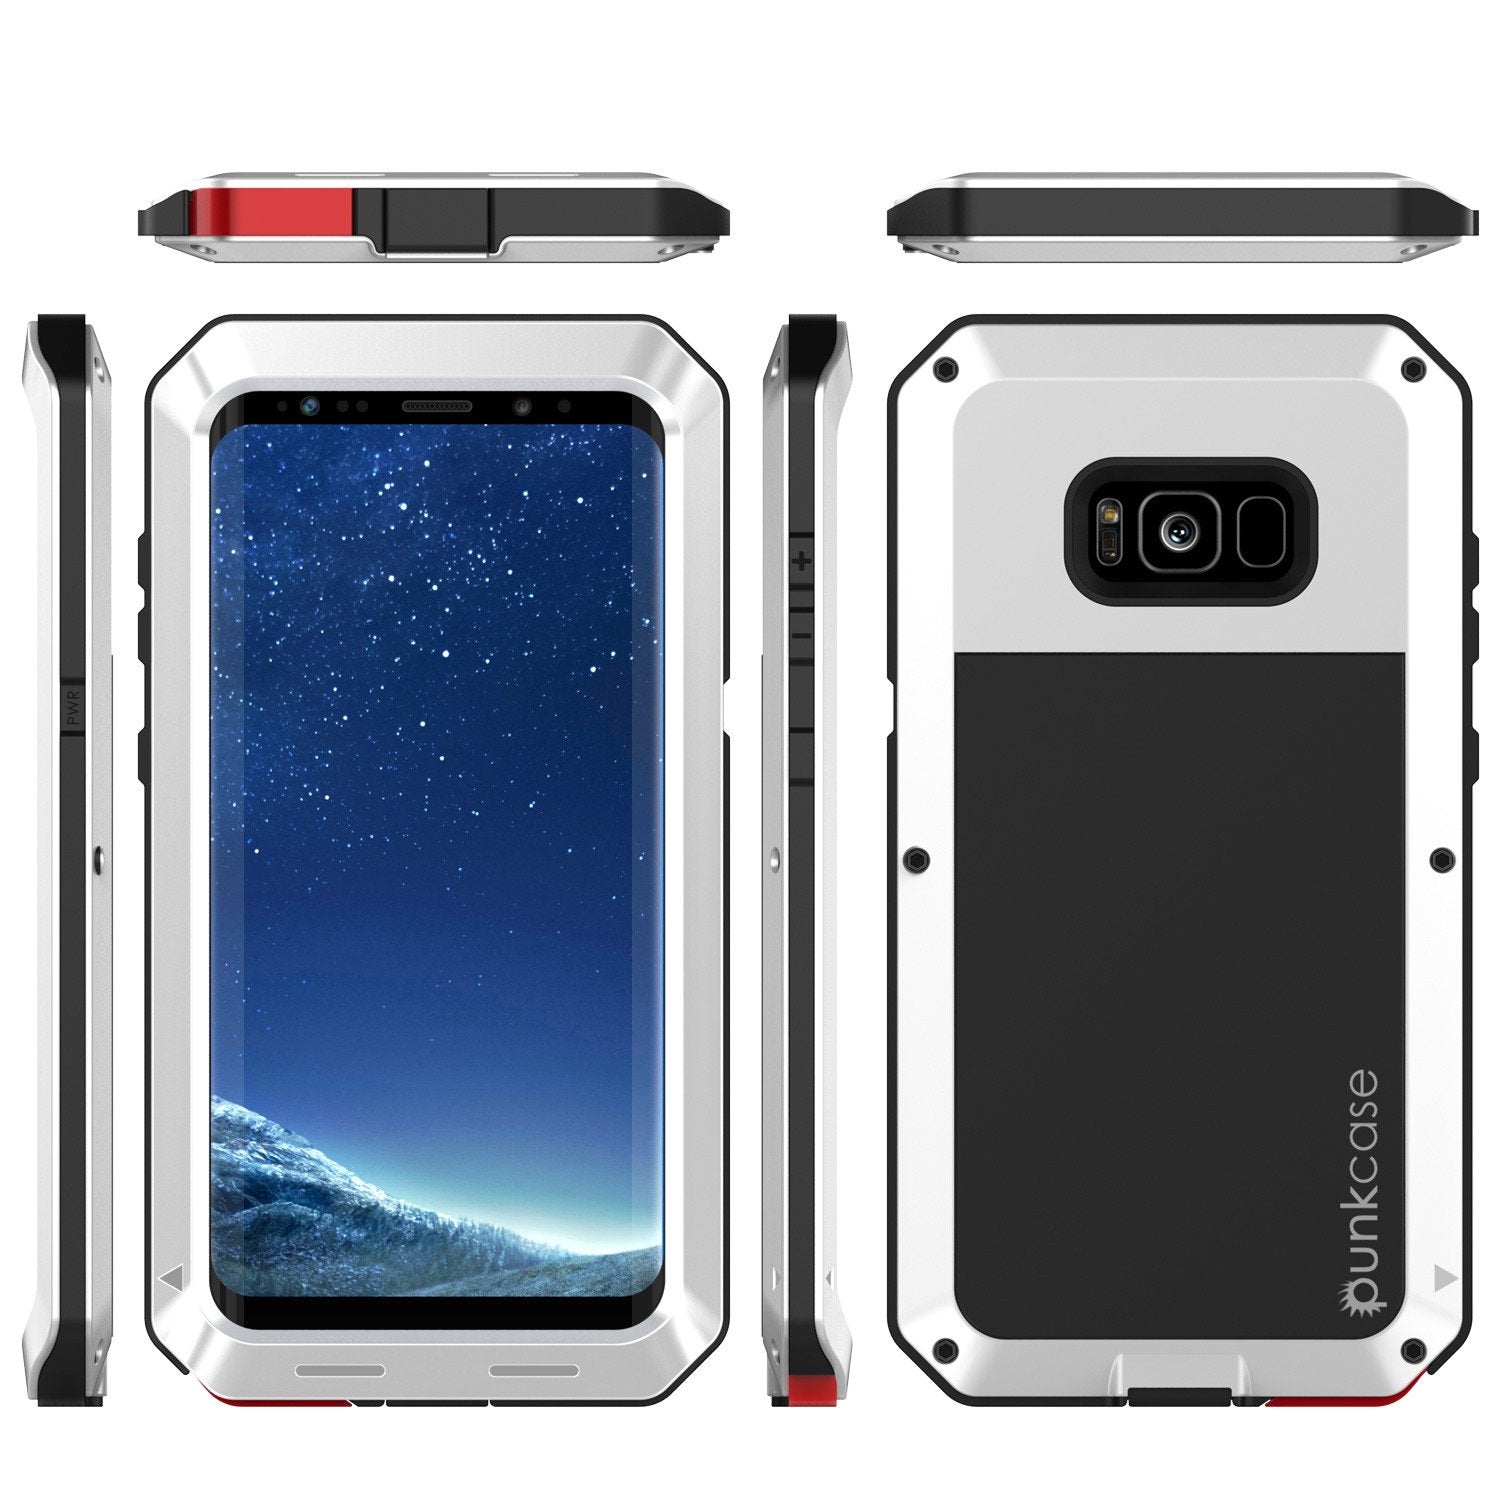 Galaxy S8+ Plus Metal Case, Heavy Duty Military Grade Rugged Armor Cover [shock proof] W/ Prime Drop Protection [WHITE]